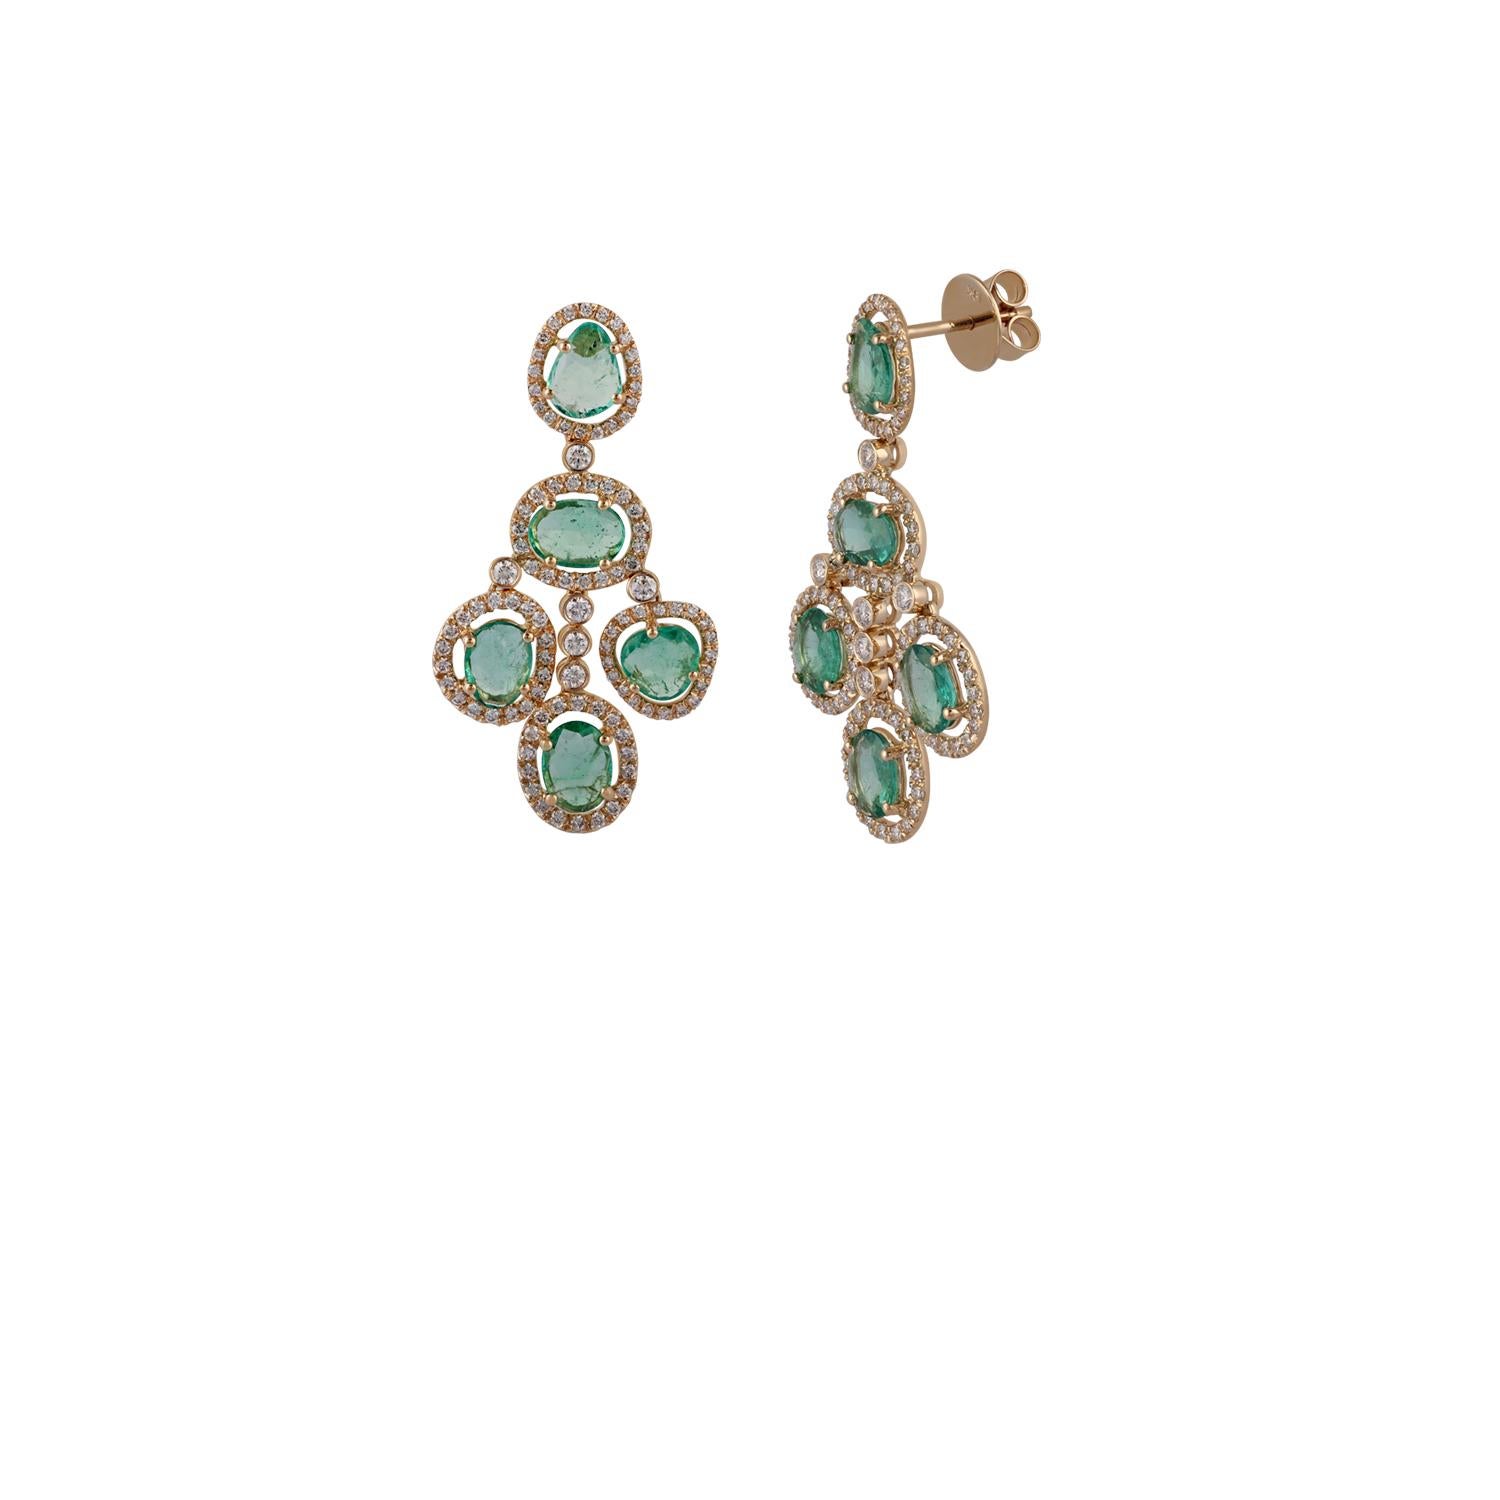 This is an exclusive pair of emerald & diamond earrings features 10 pieces of emeralds weight 4.81 carats surrounded by the cluster of diamonds weight 1.43 carats, the earrings entirely made in 18k yellow gold weight 7.41 grams, these  earrings have